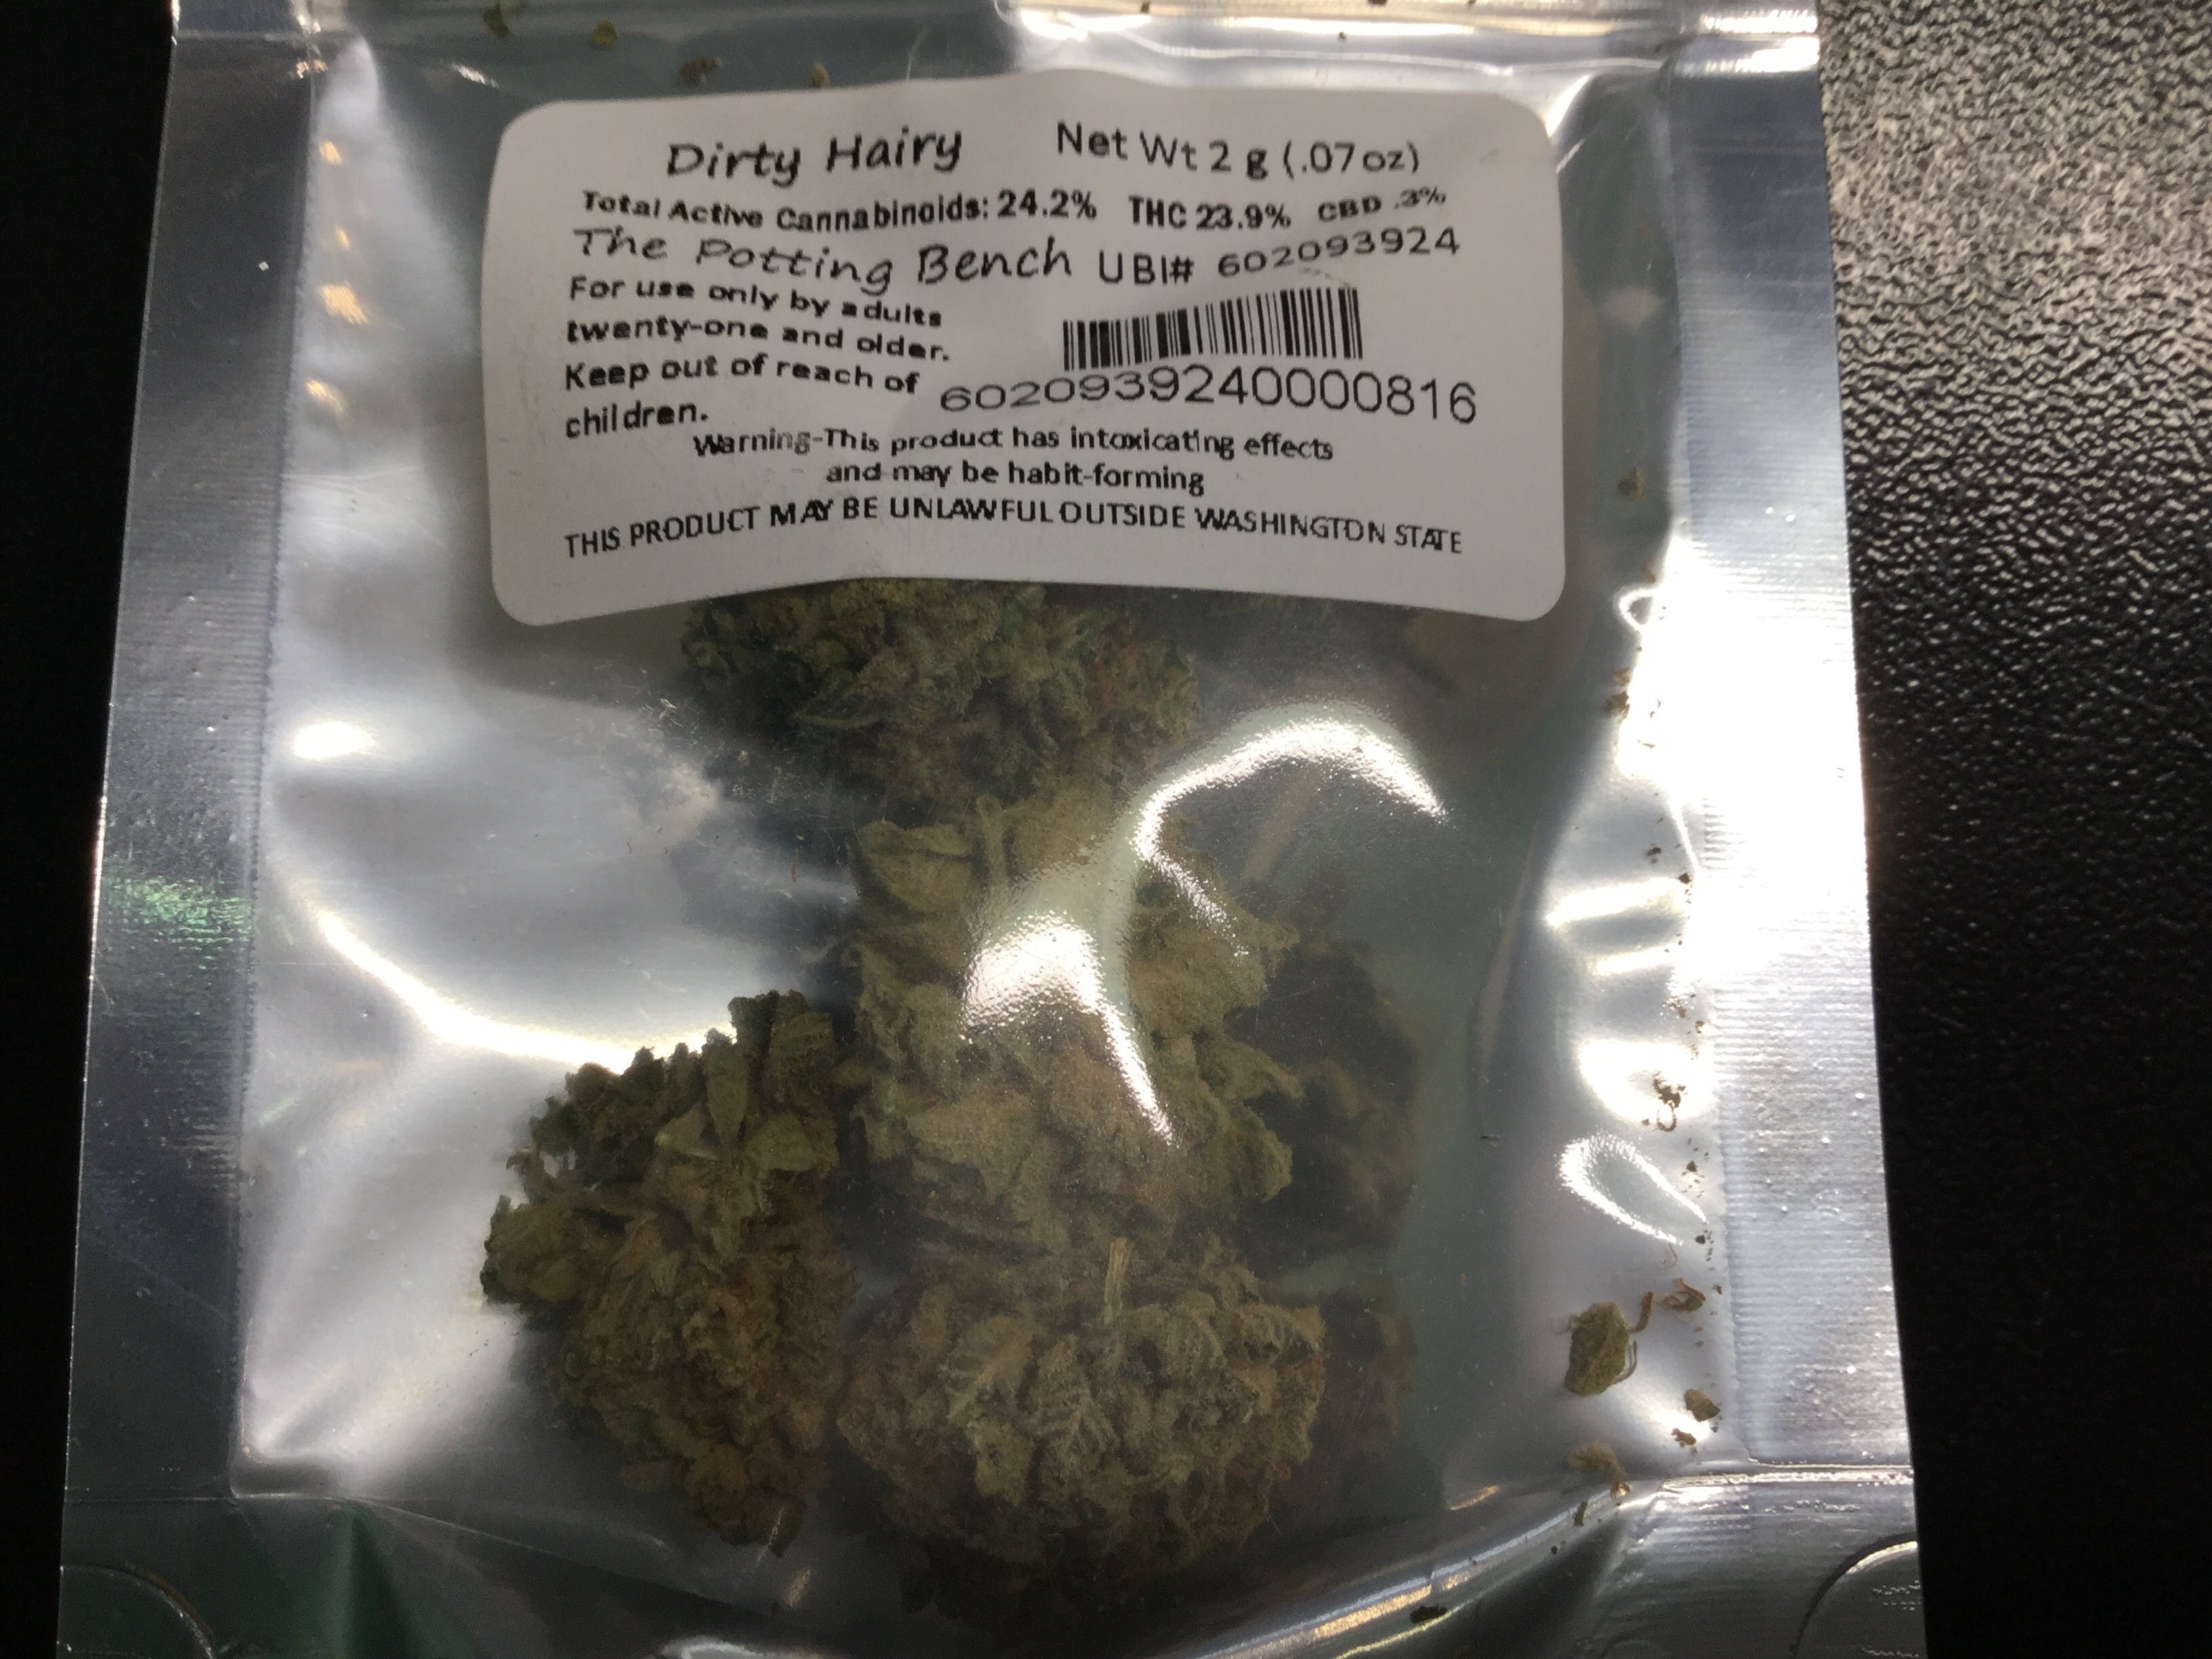 indica-tpb-dirty-hairy